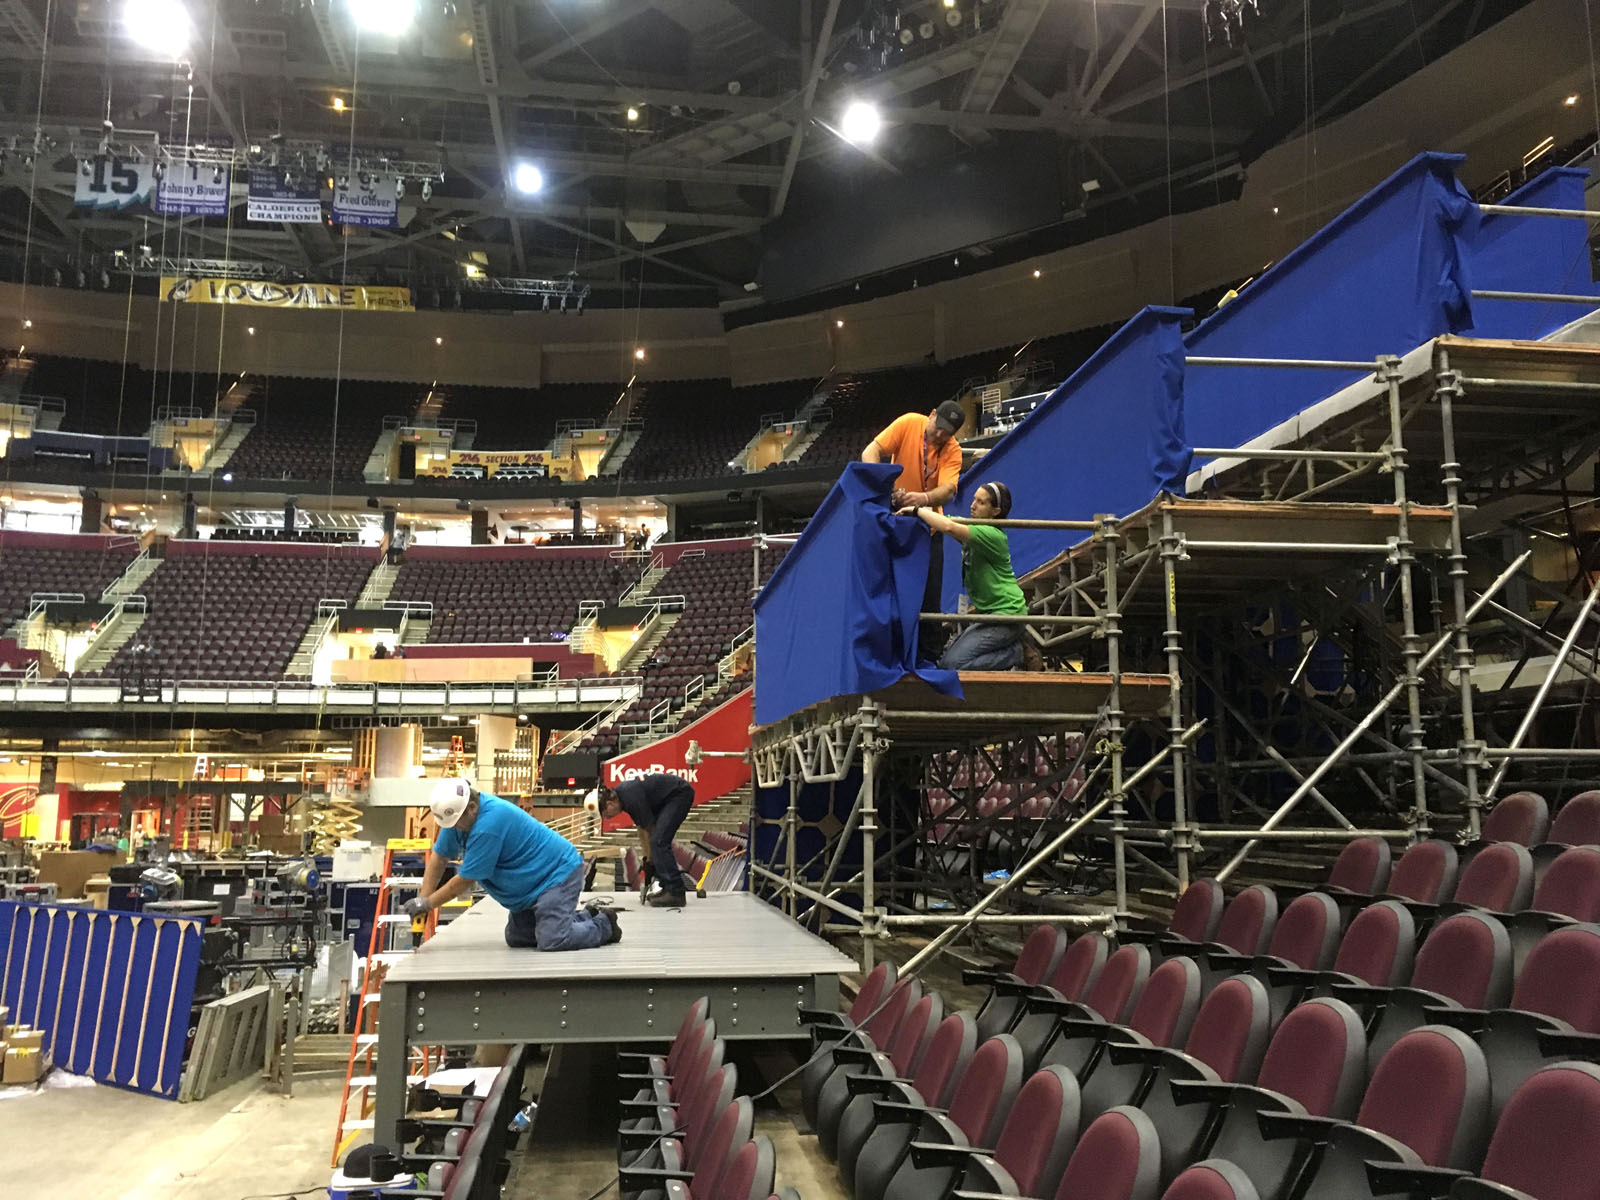 Workers prepare a camera platform inside Quicken Loans Arena in preparation for the Republican National Convention on Tuesday, June 28, 2016, in Cleveland. (AP Photo/Mark Gillispie)